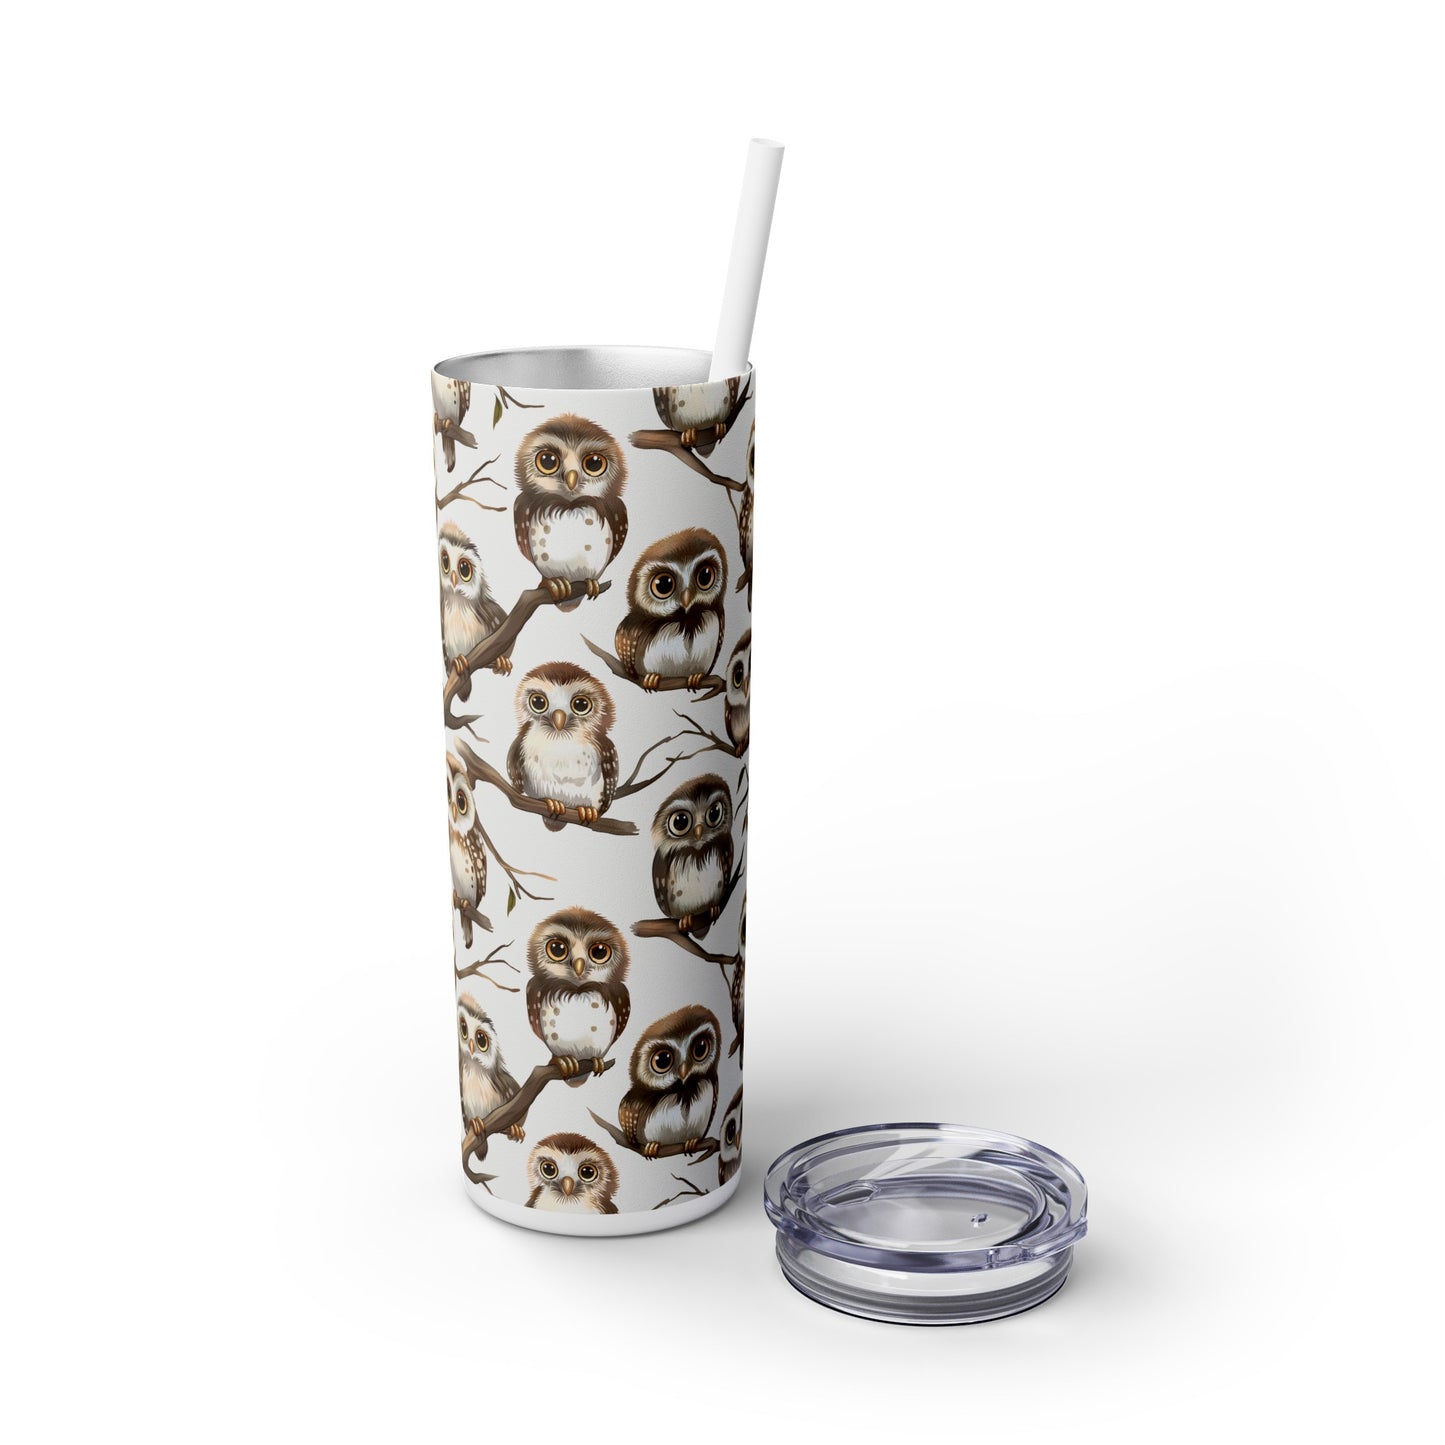 Insulated 20 oz Tumbler with Lid & Straw, Baby Owlets - Double-walled Stainless Steel, Keeps Drinks Hot or Cold